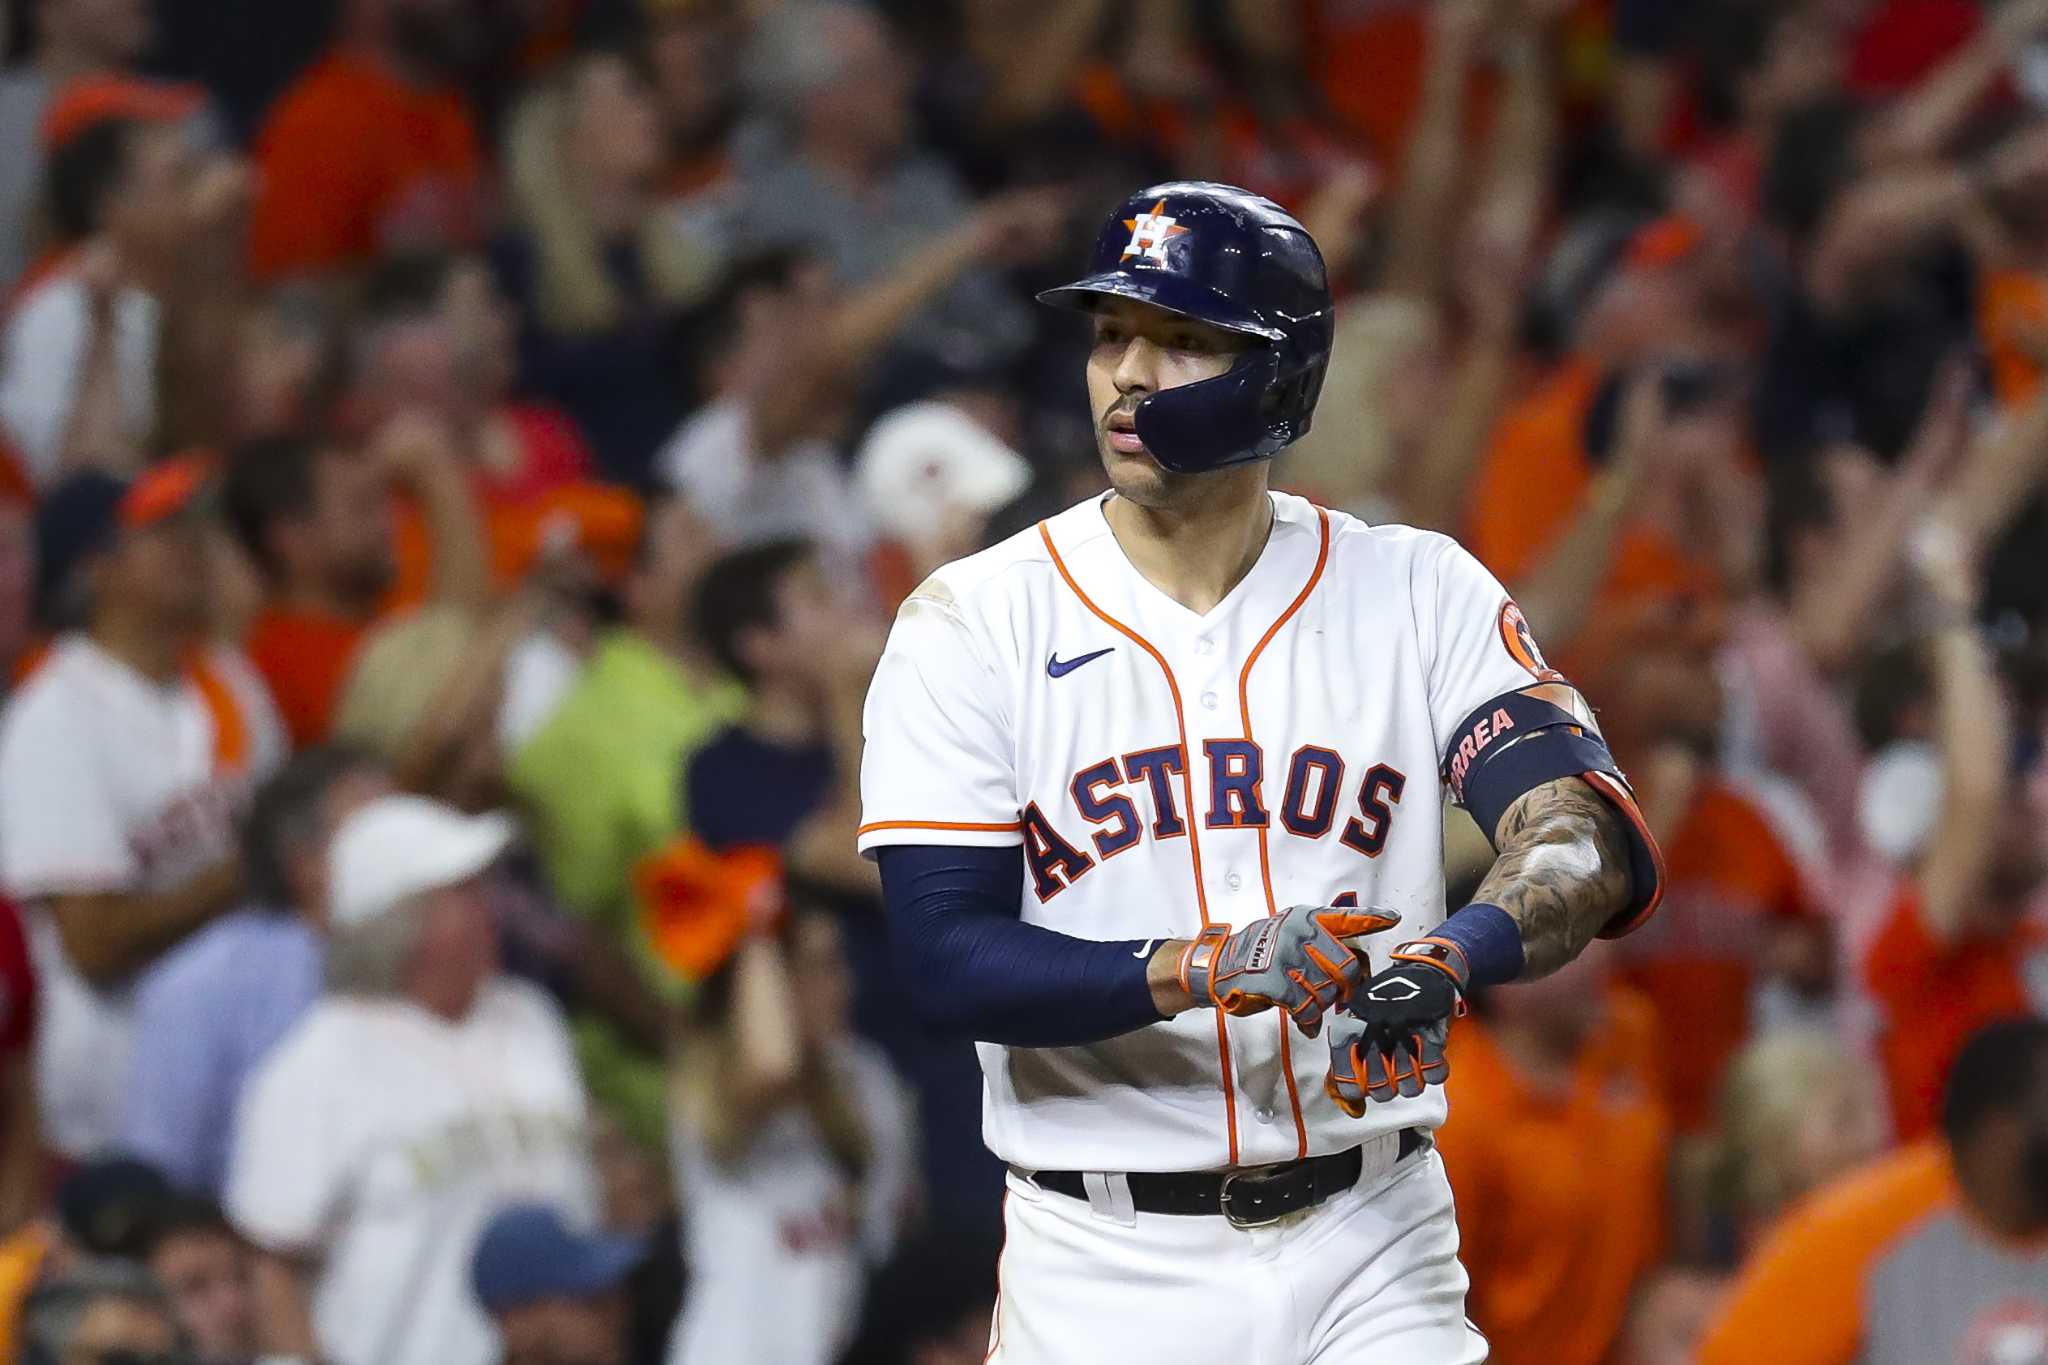 Astros: Carlos Correa wins first Gold Glove of his career